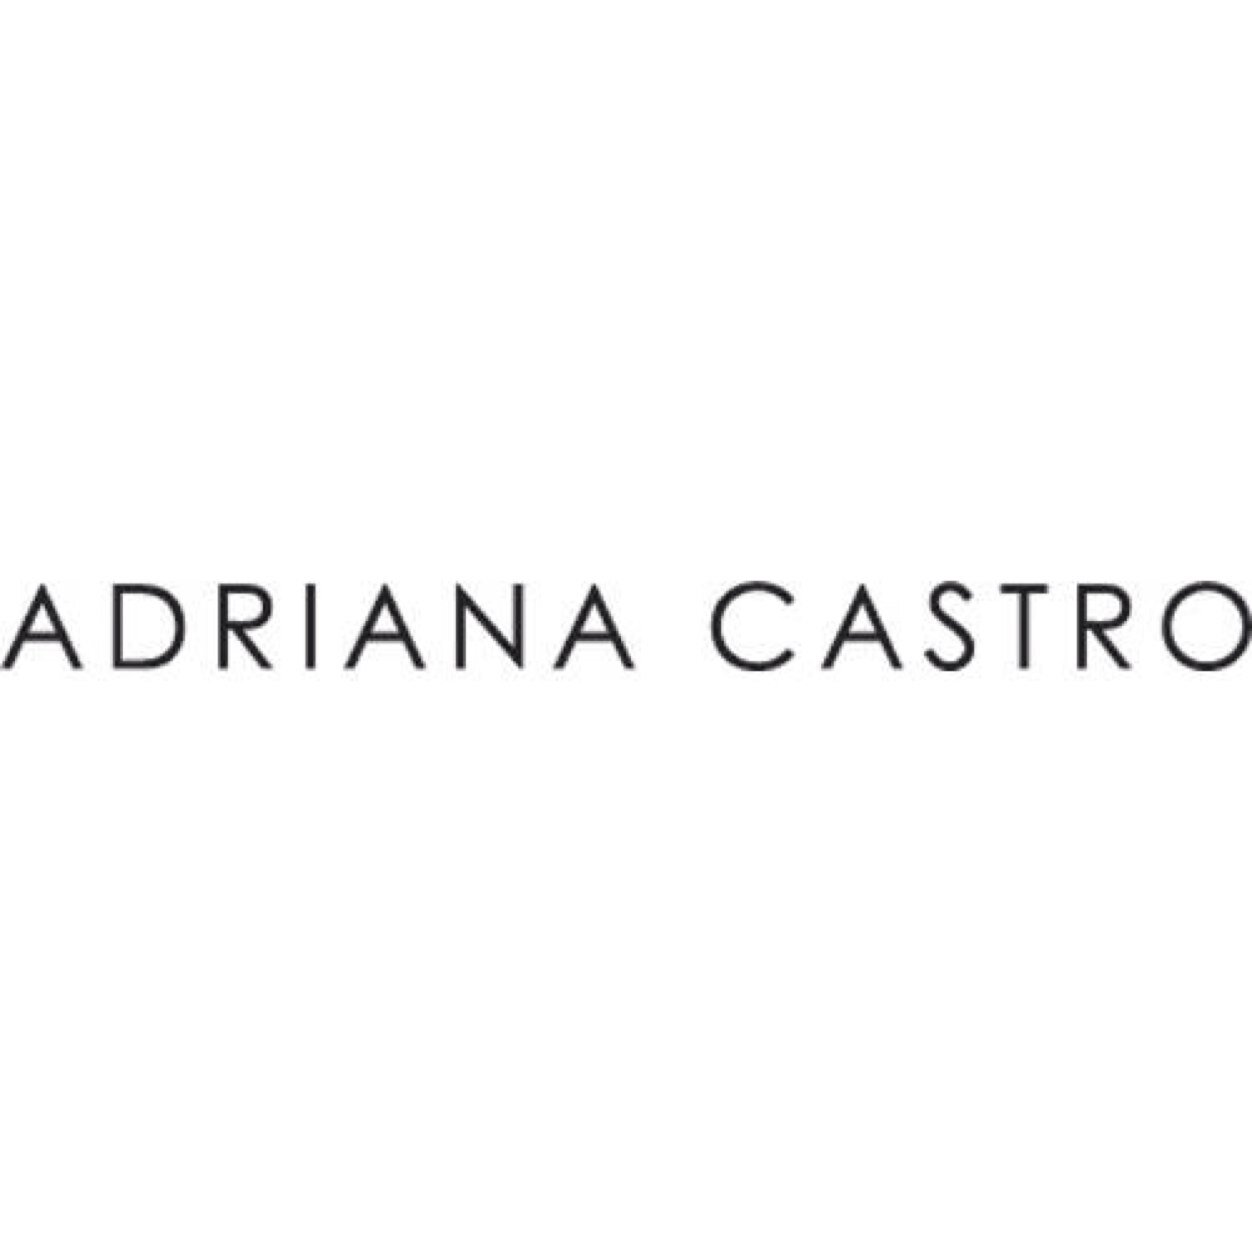 The official Twitter page of Adriana Castro, Colombian designer of handbags and accessories.